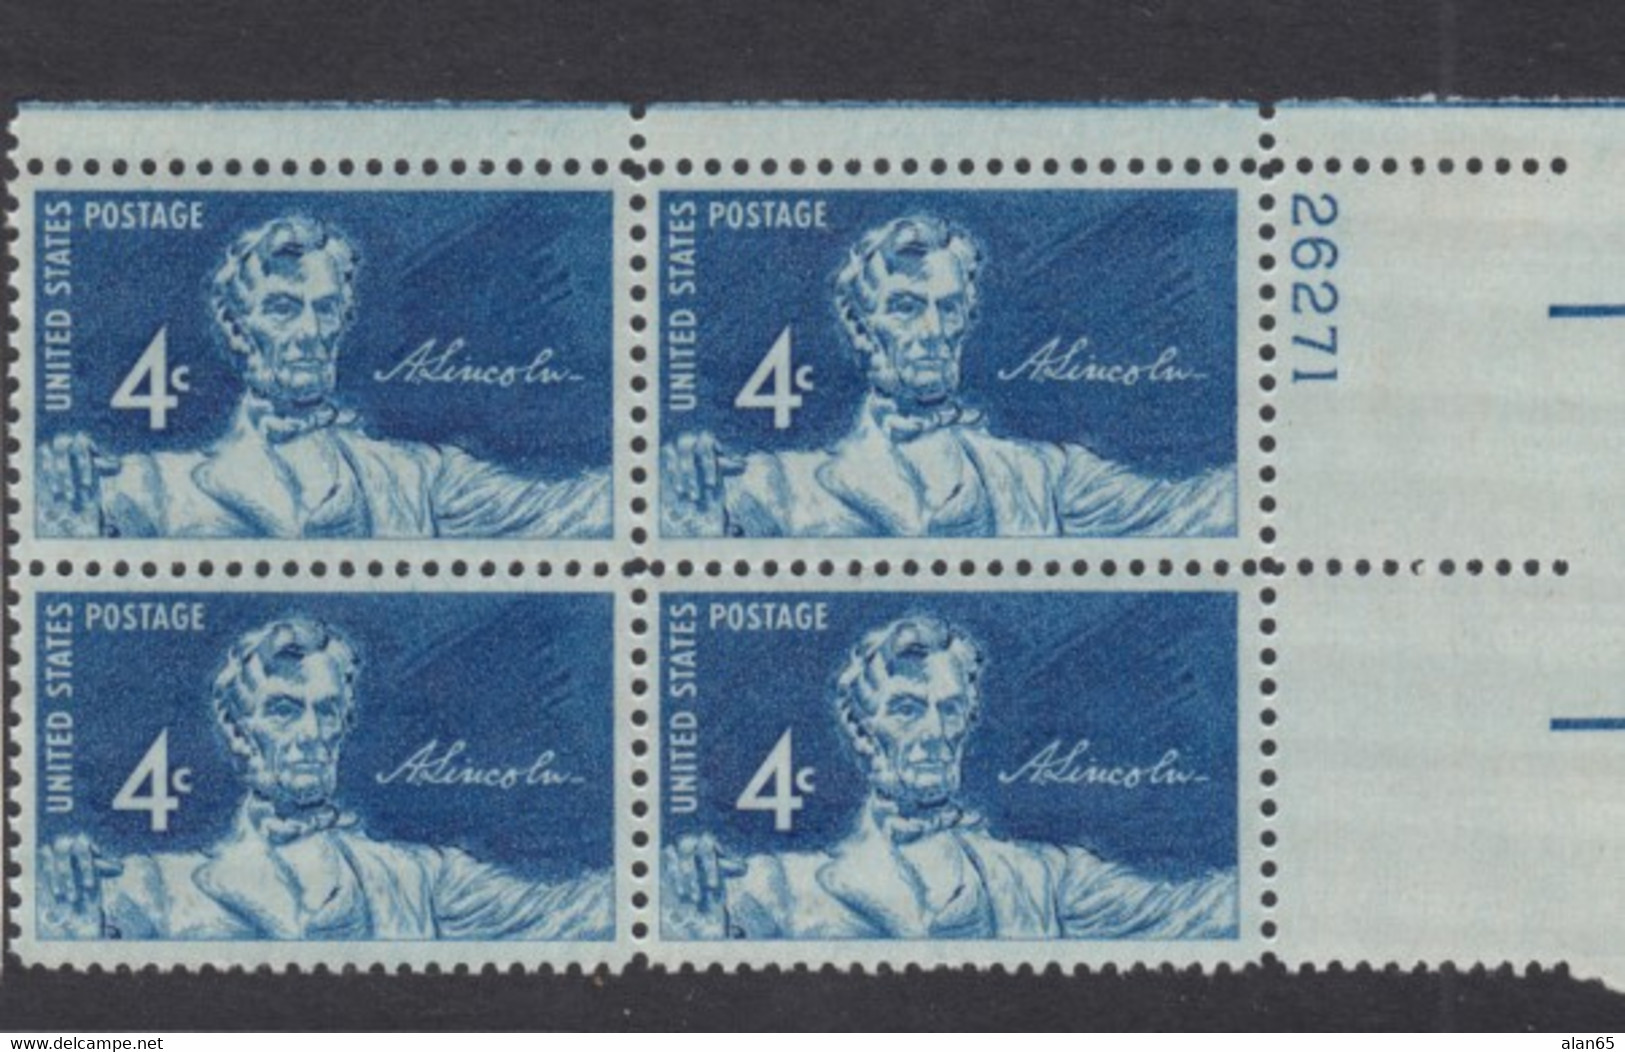 Sc#1116, Plate # Block Of 4 MNH, 4c Lincoln Sesquicentennial Issue, Daniel Chester French Statue US President Lincoln - Plaatnummers